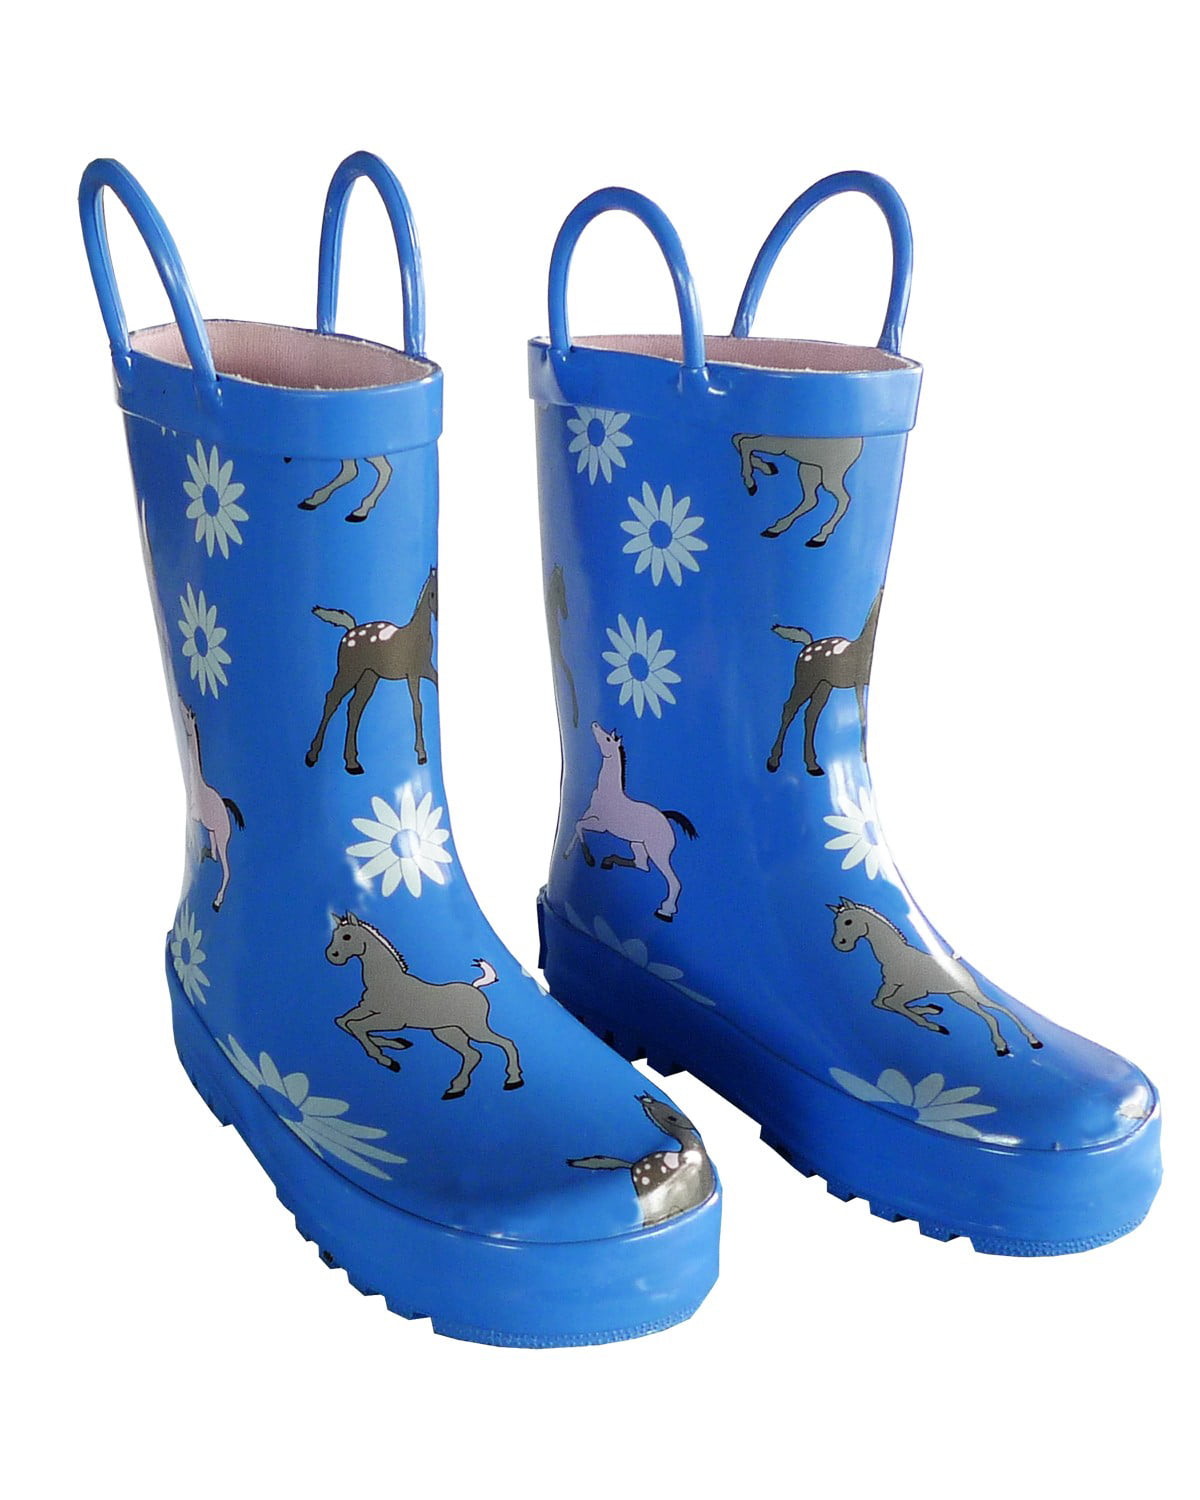 Toddler and Youth Unisex Kids Blue Rain Boot Snow Boot with Red and White Polka Dots w/Tie and Lining Boys Girls A.O.R 